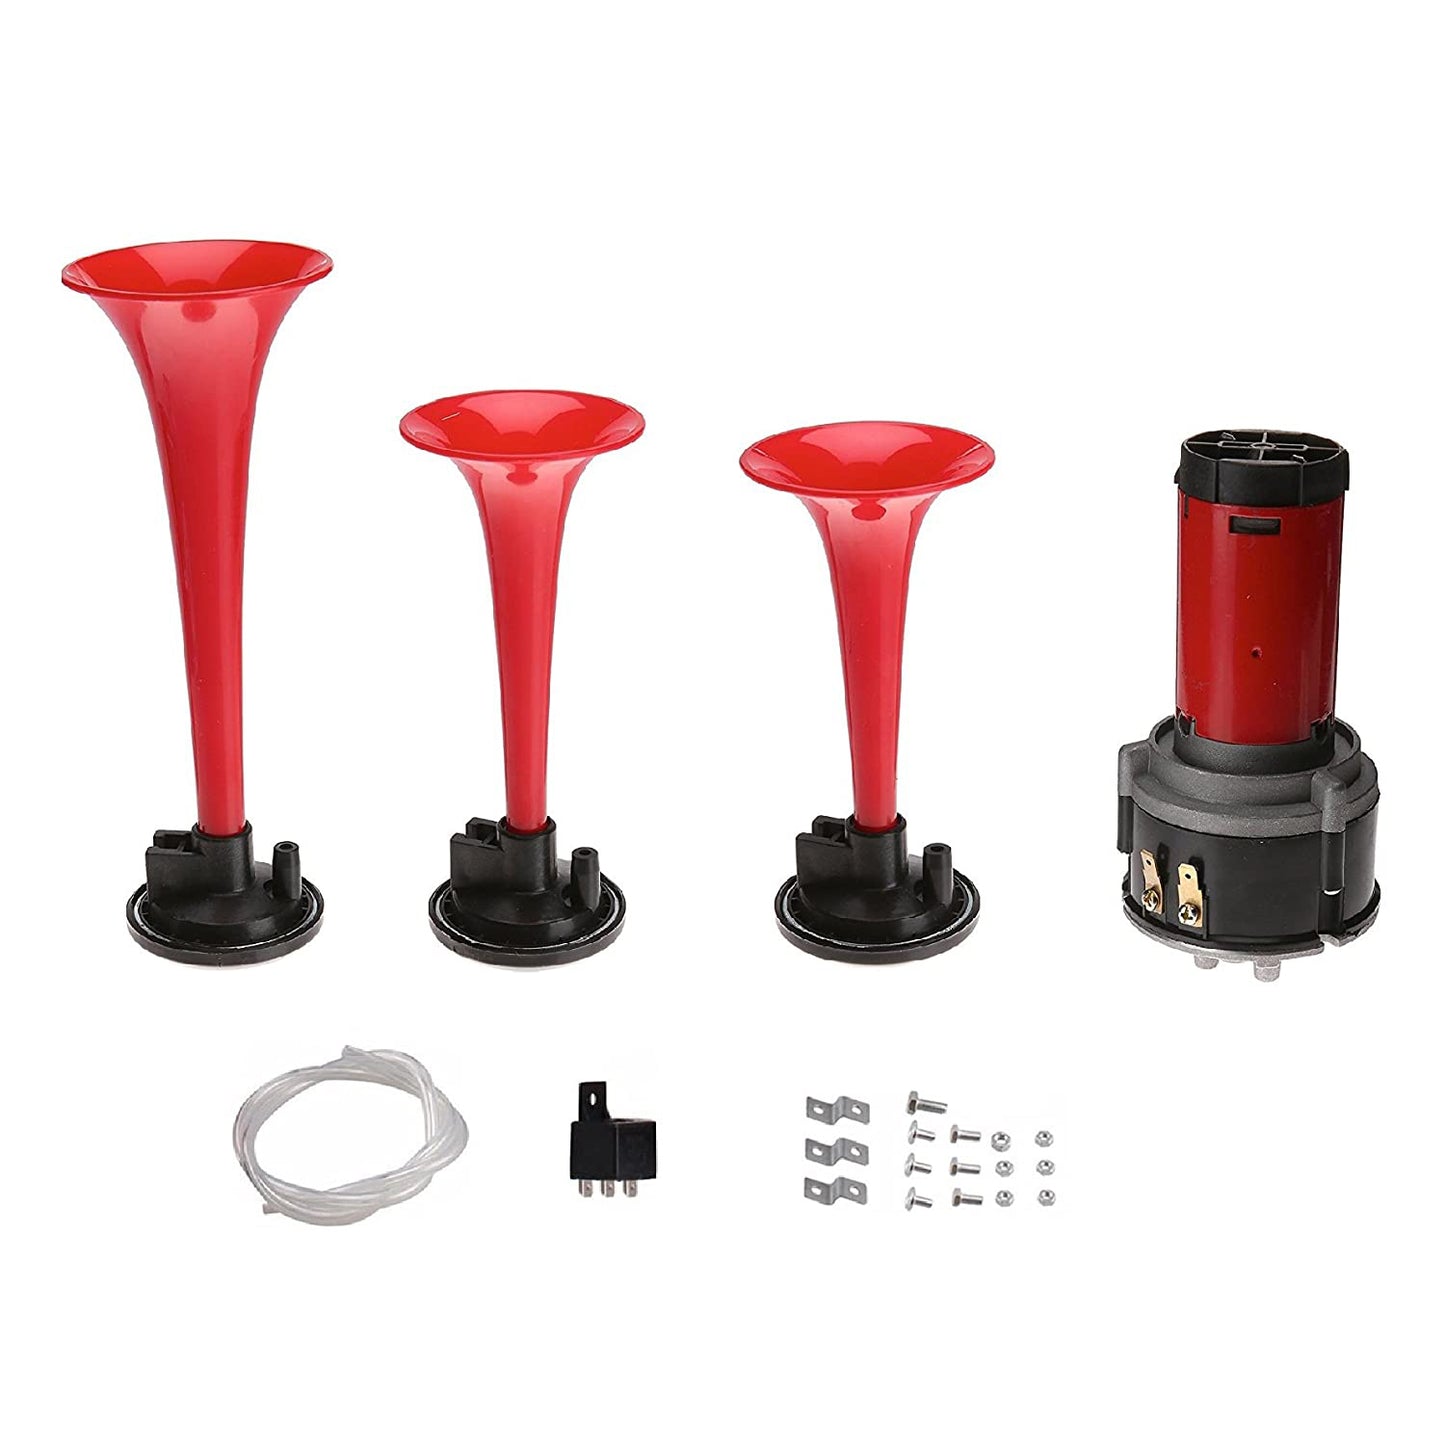 Oshotto 3 Pipe Air Pressure Horn for Cars, Trucks, Boats, ATVS & Heavy Vehicles (Red)